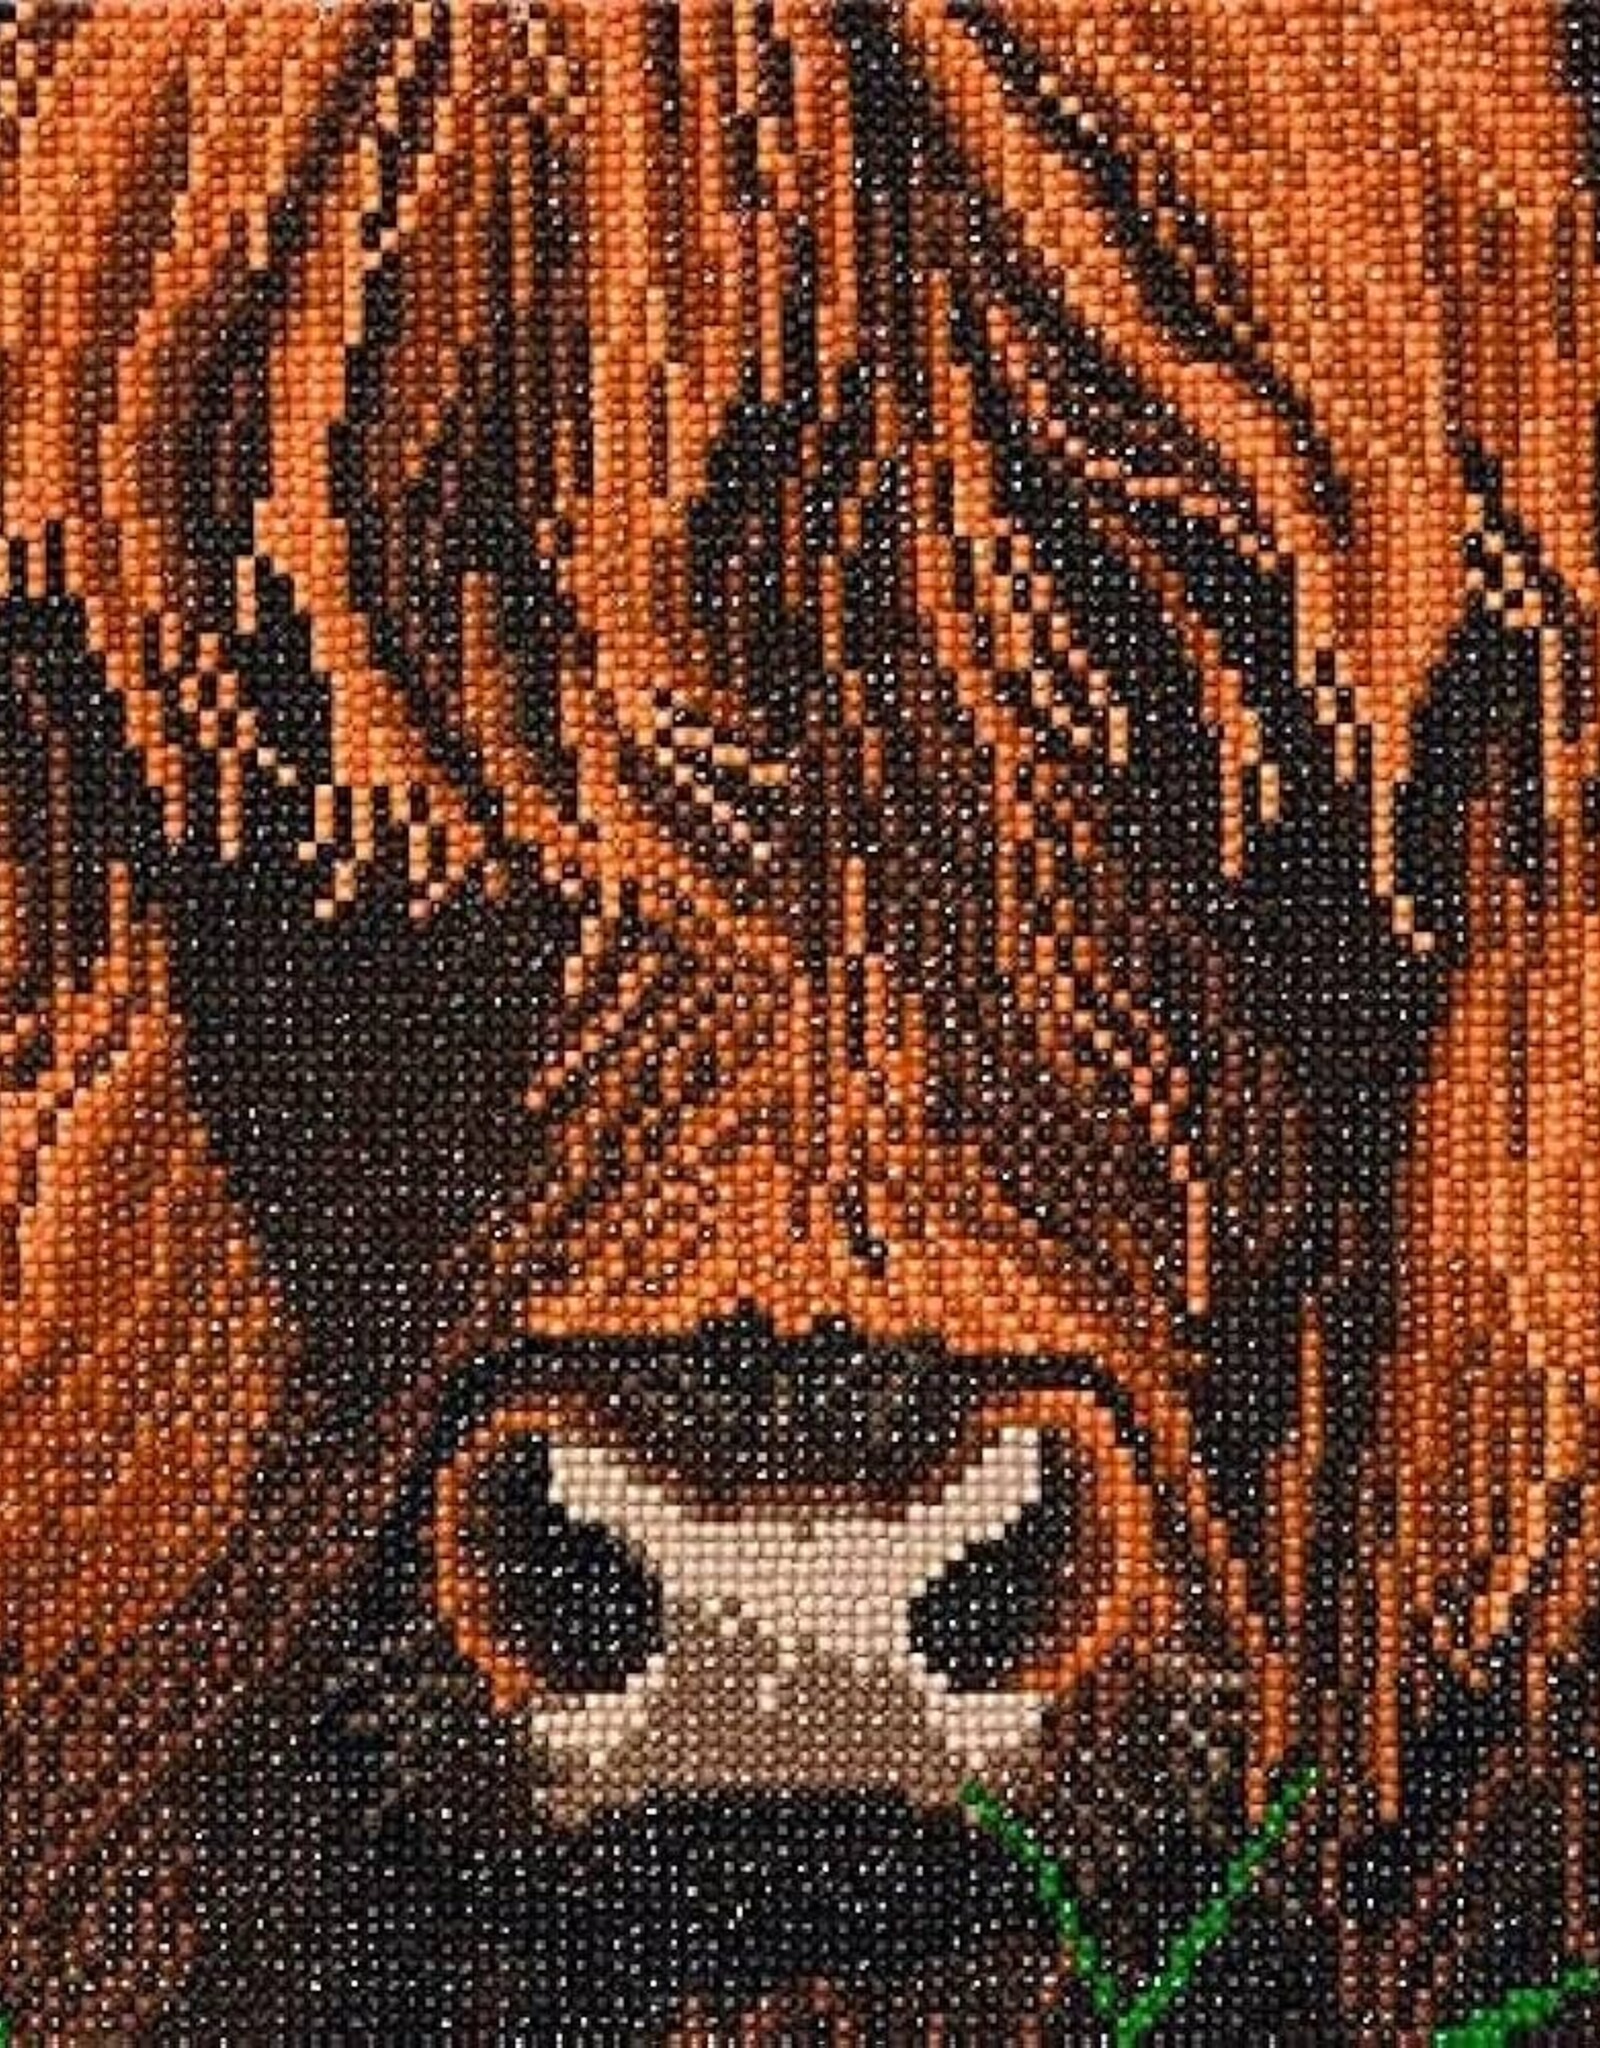 Outset media Crystal Art Md Highland Cow